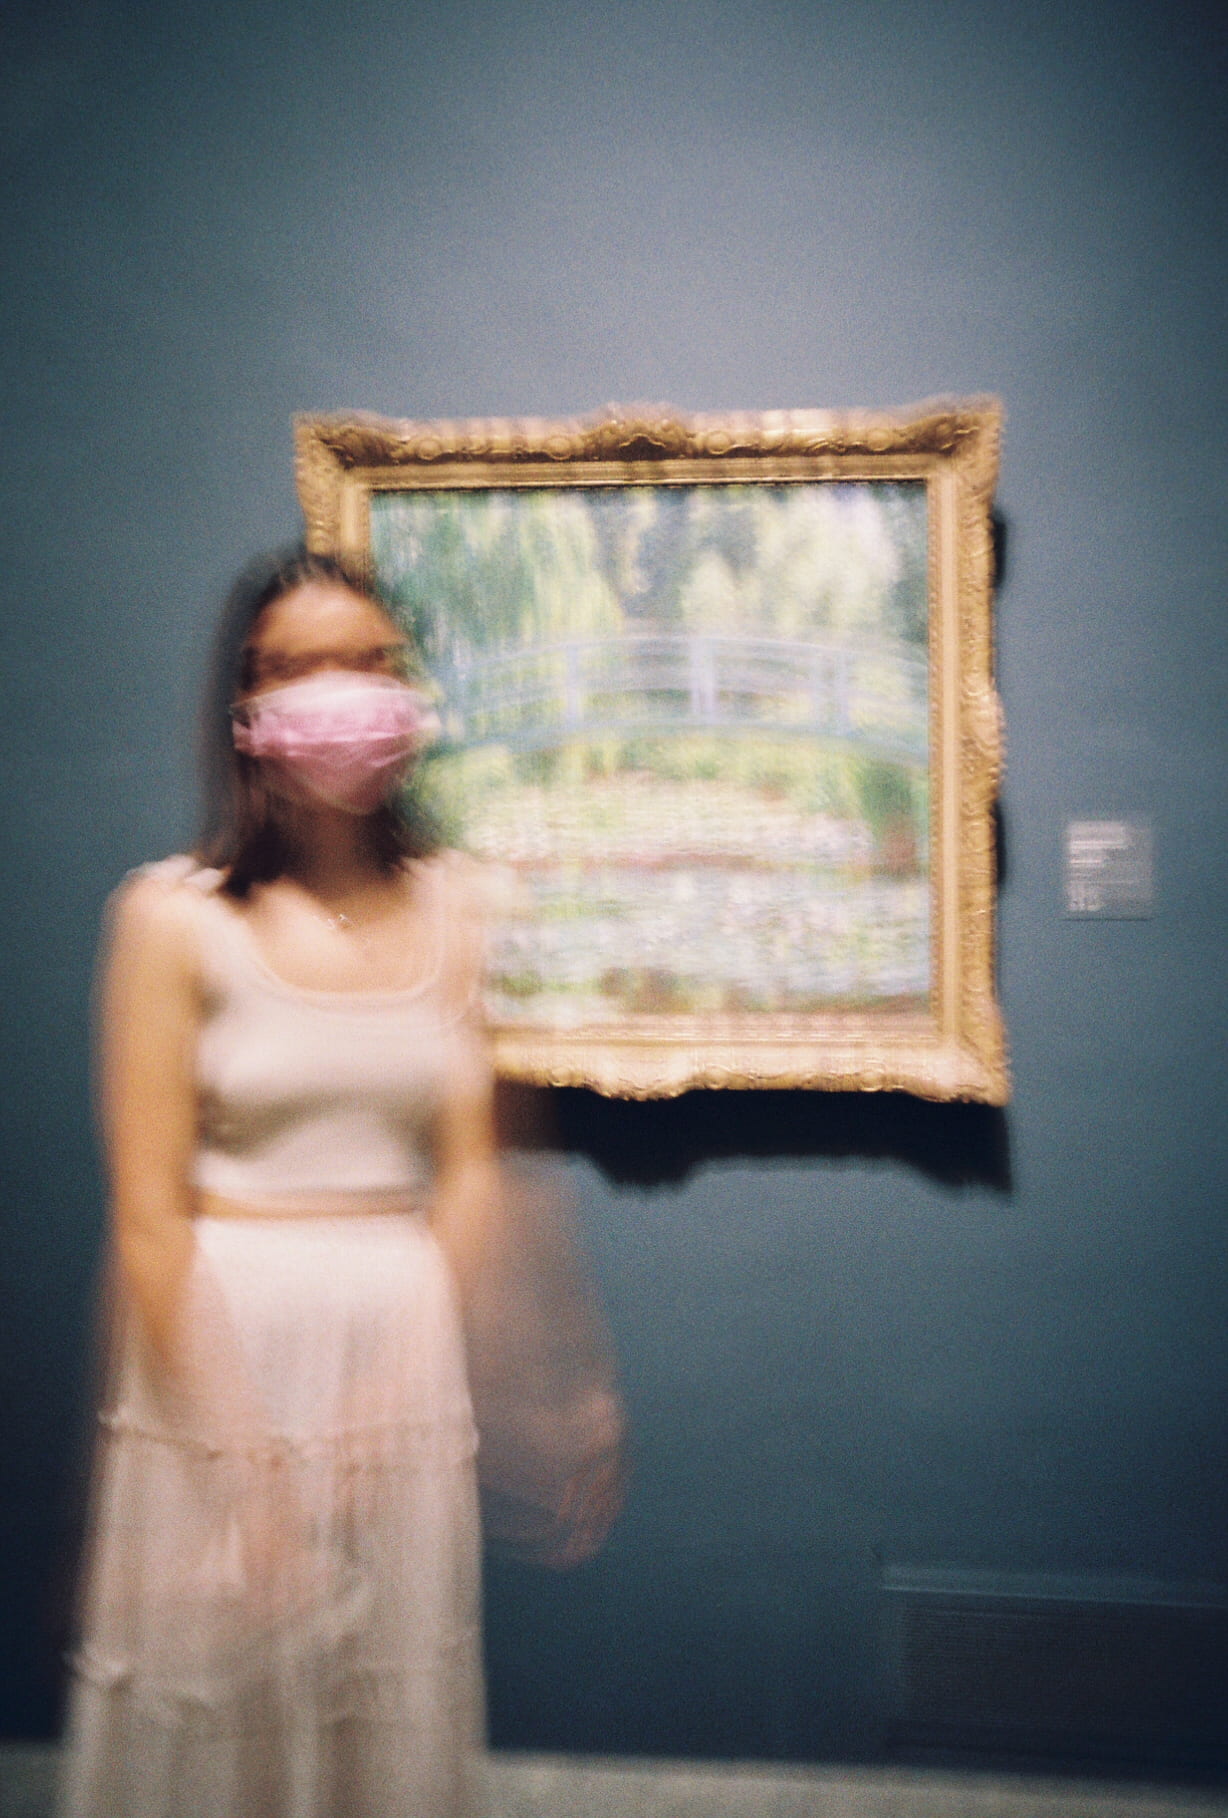 blurred image of girl standing in front of framed picture